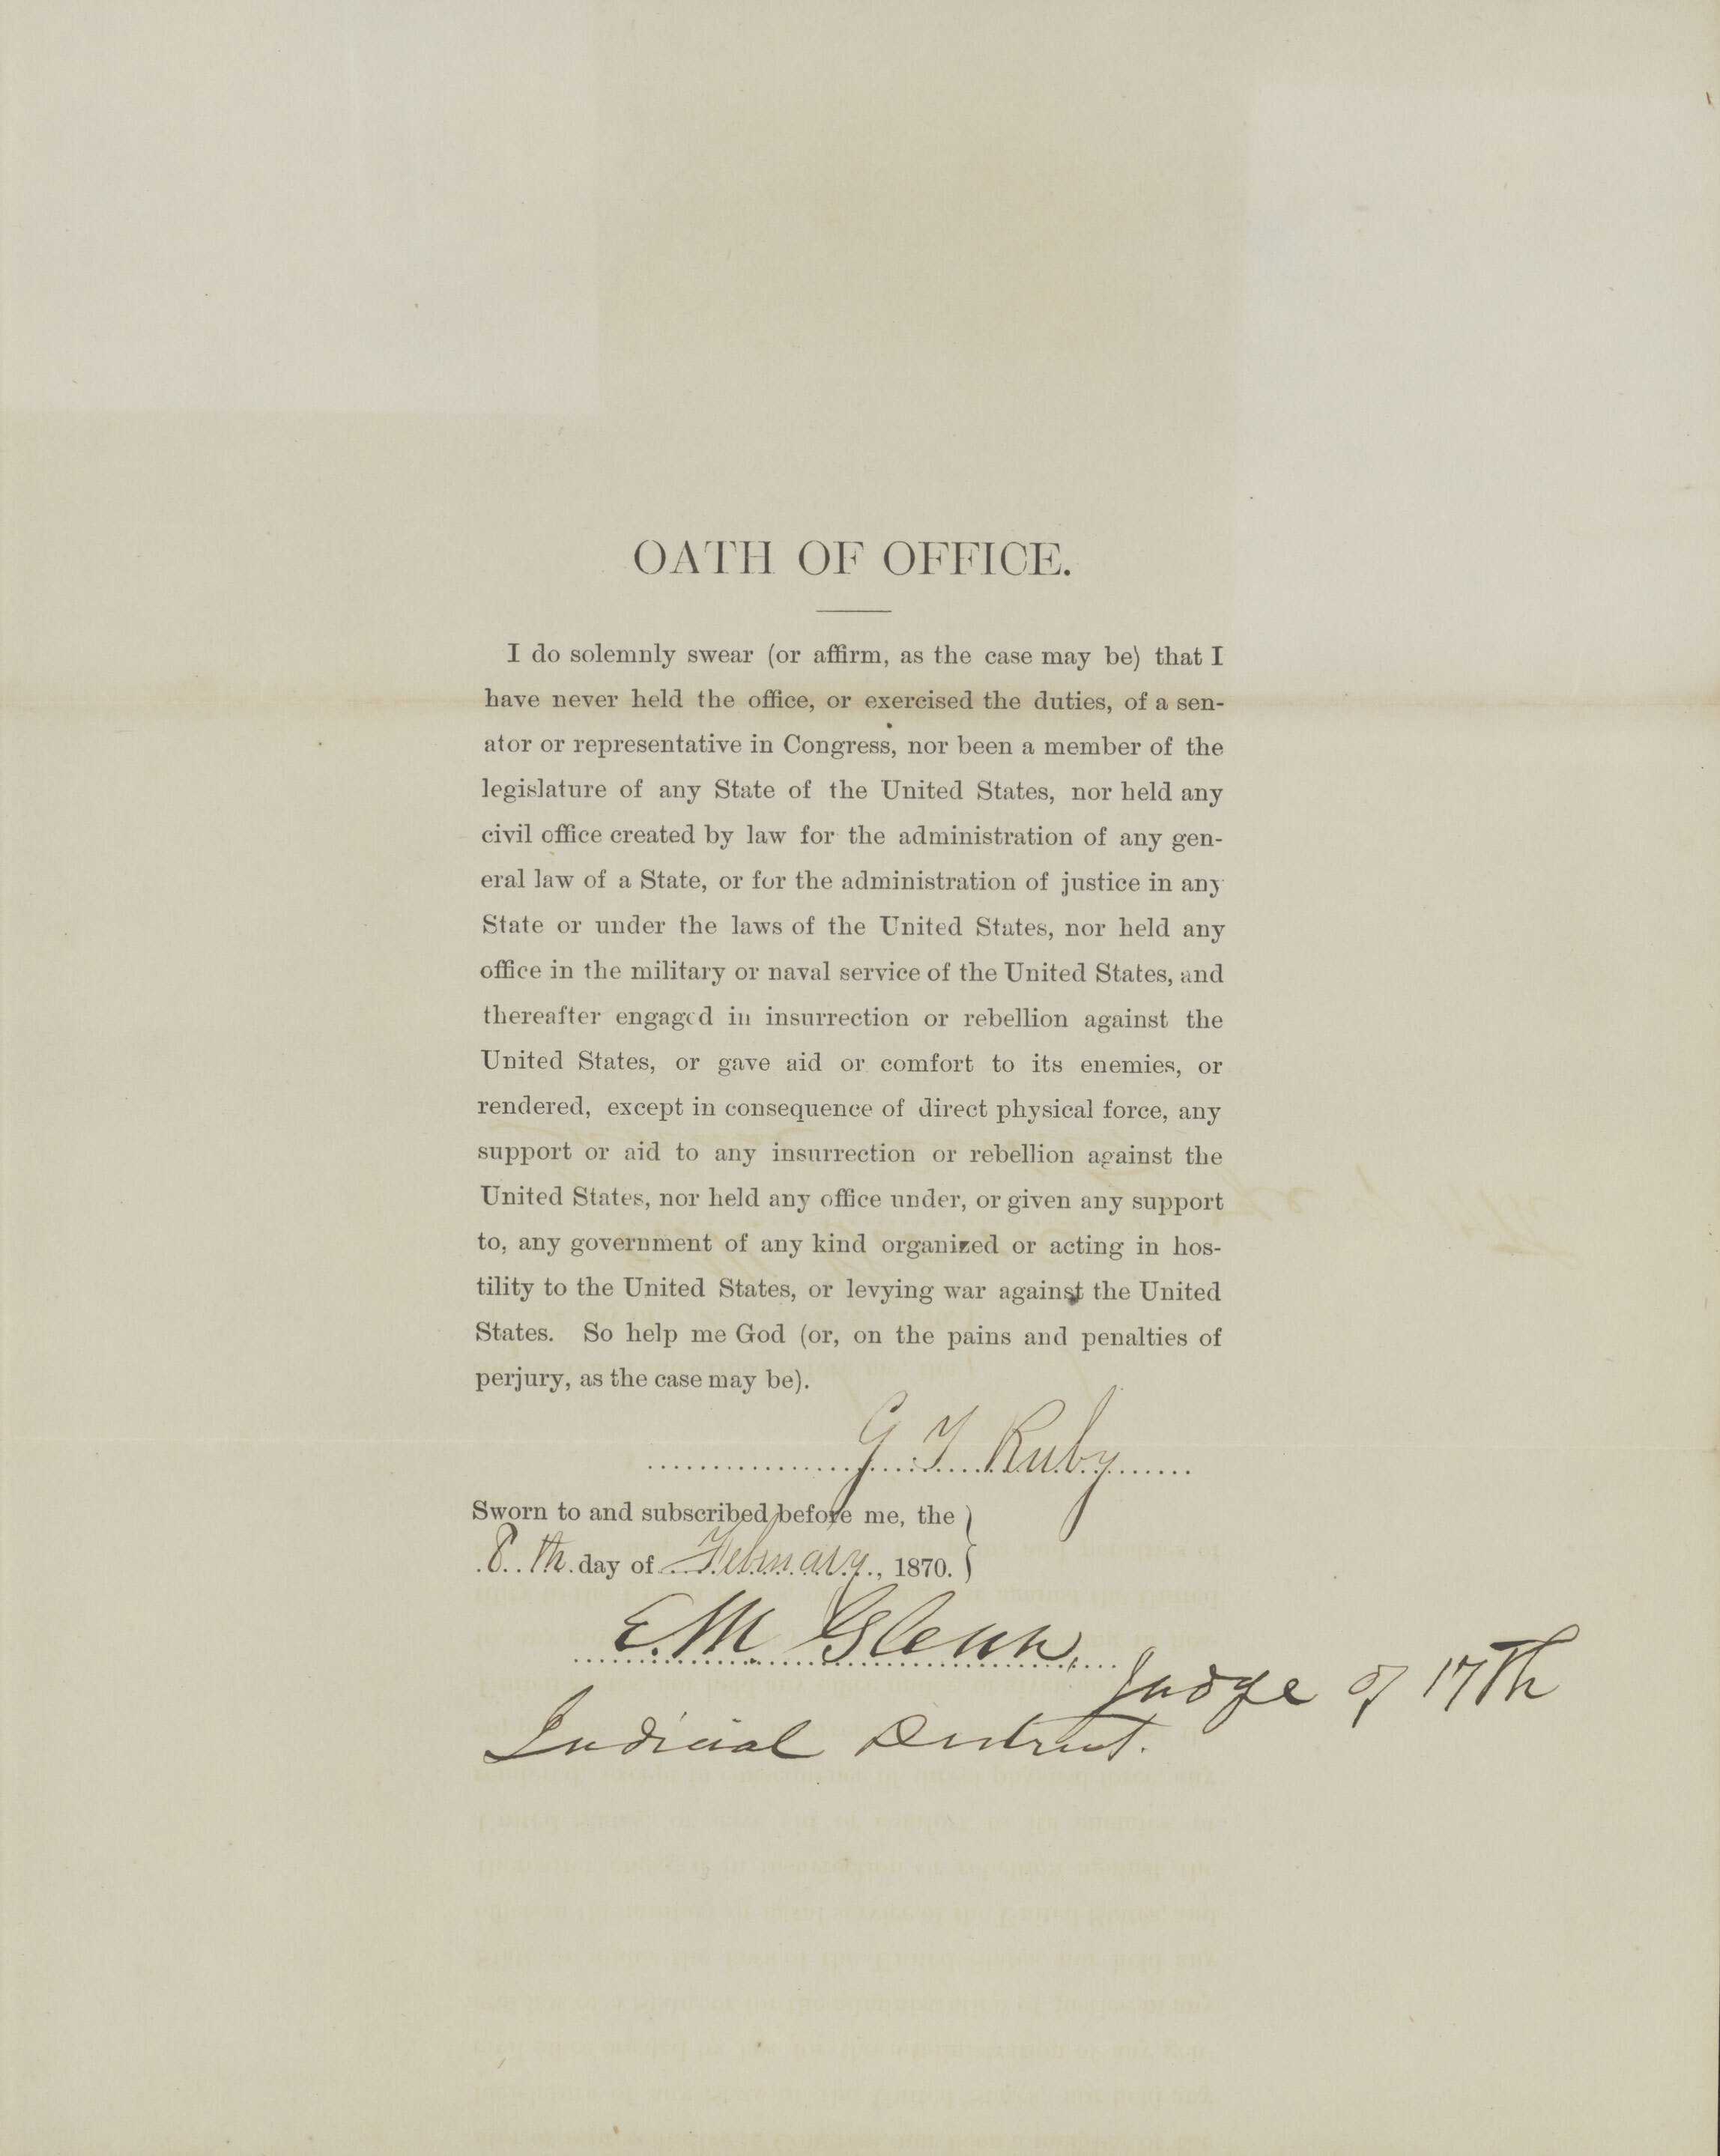 Printed document entitled "Oath of Office." Signed by G. T. Ruby.  This document affirms his service as a representative of Congress on the 8th of February 1870.